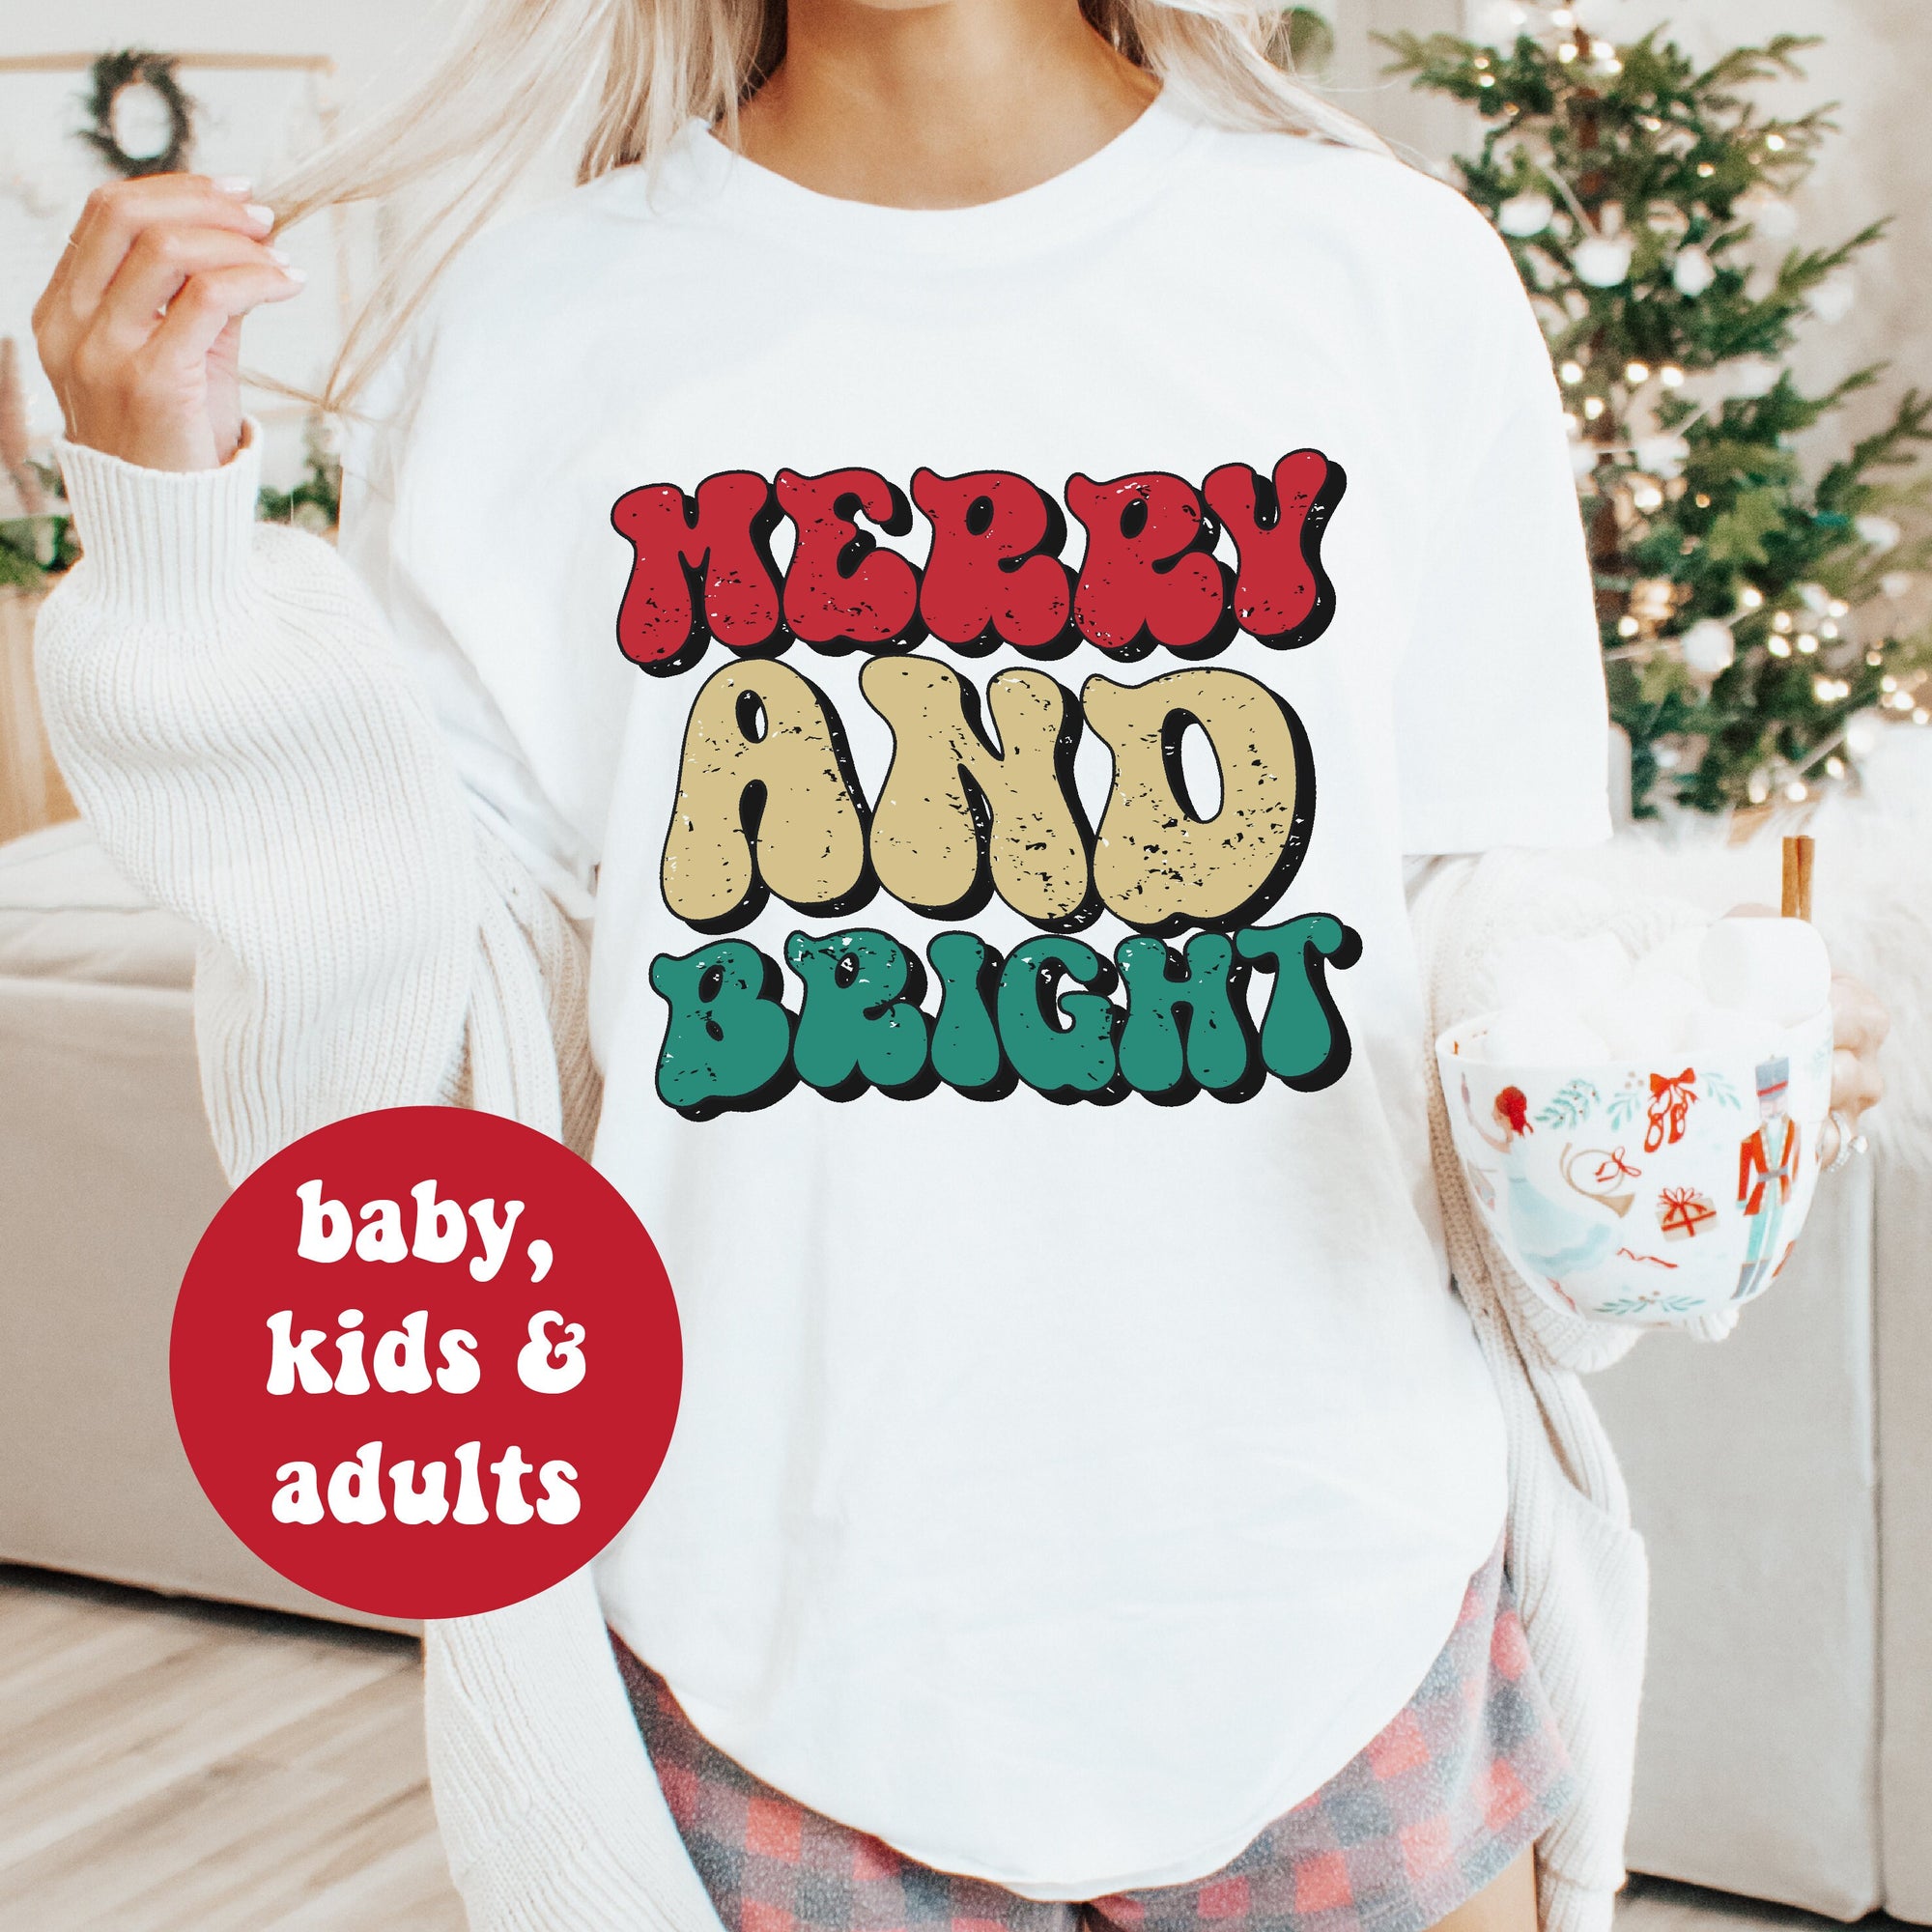 Merry And Bright Christmas T-Shirt, Matching Family Garments, Christmas Shirts, Matching Christmas T-Shirts, Matching Christmas Family Tees